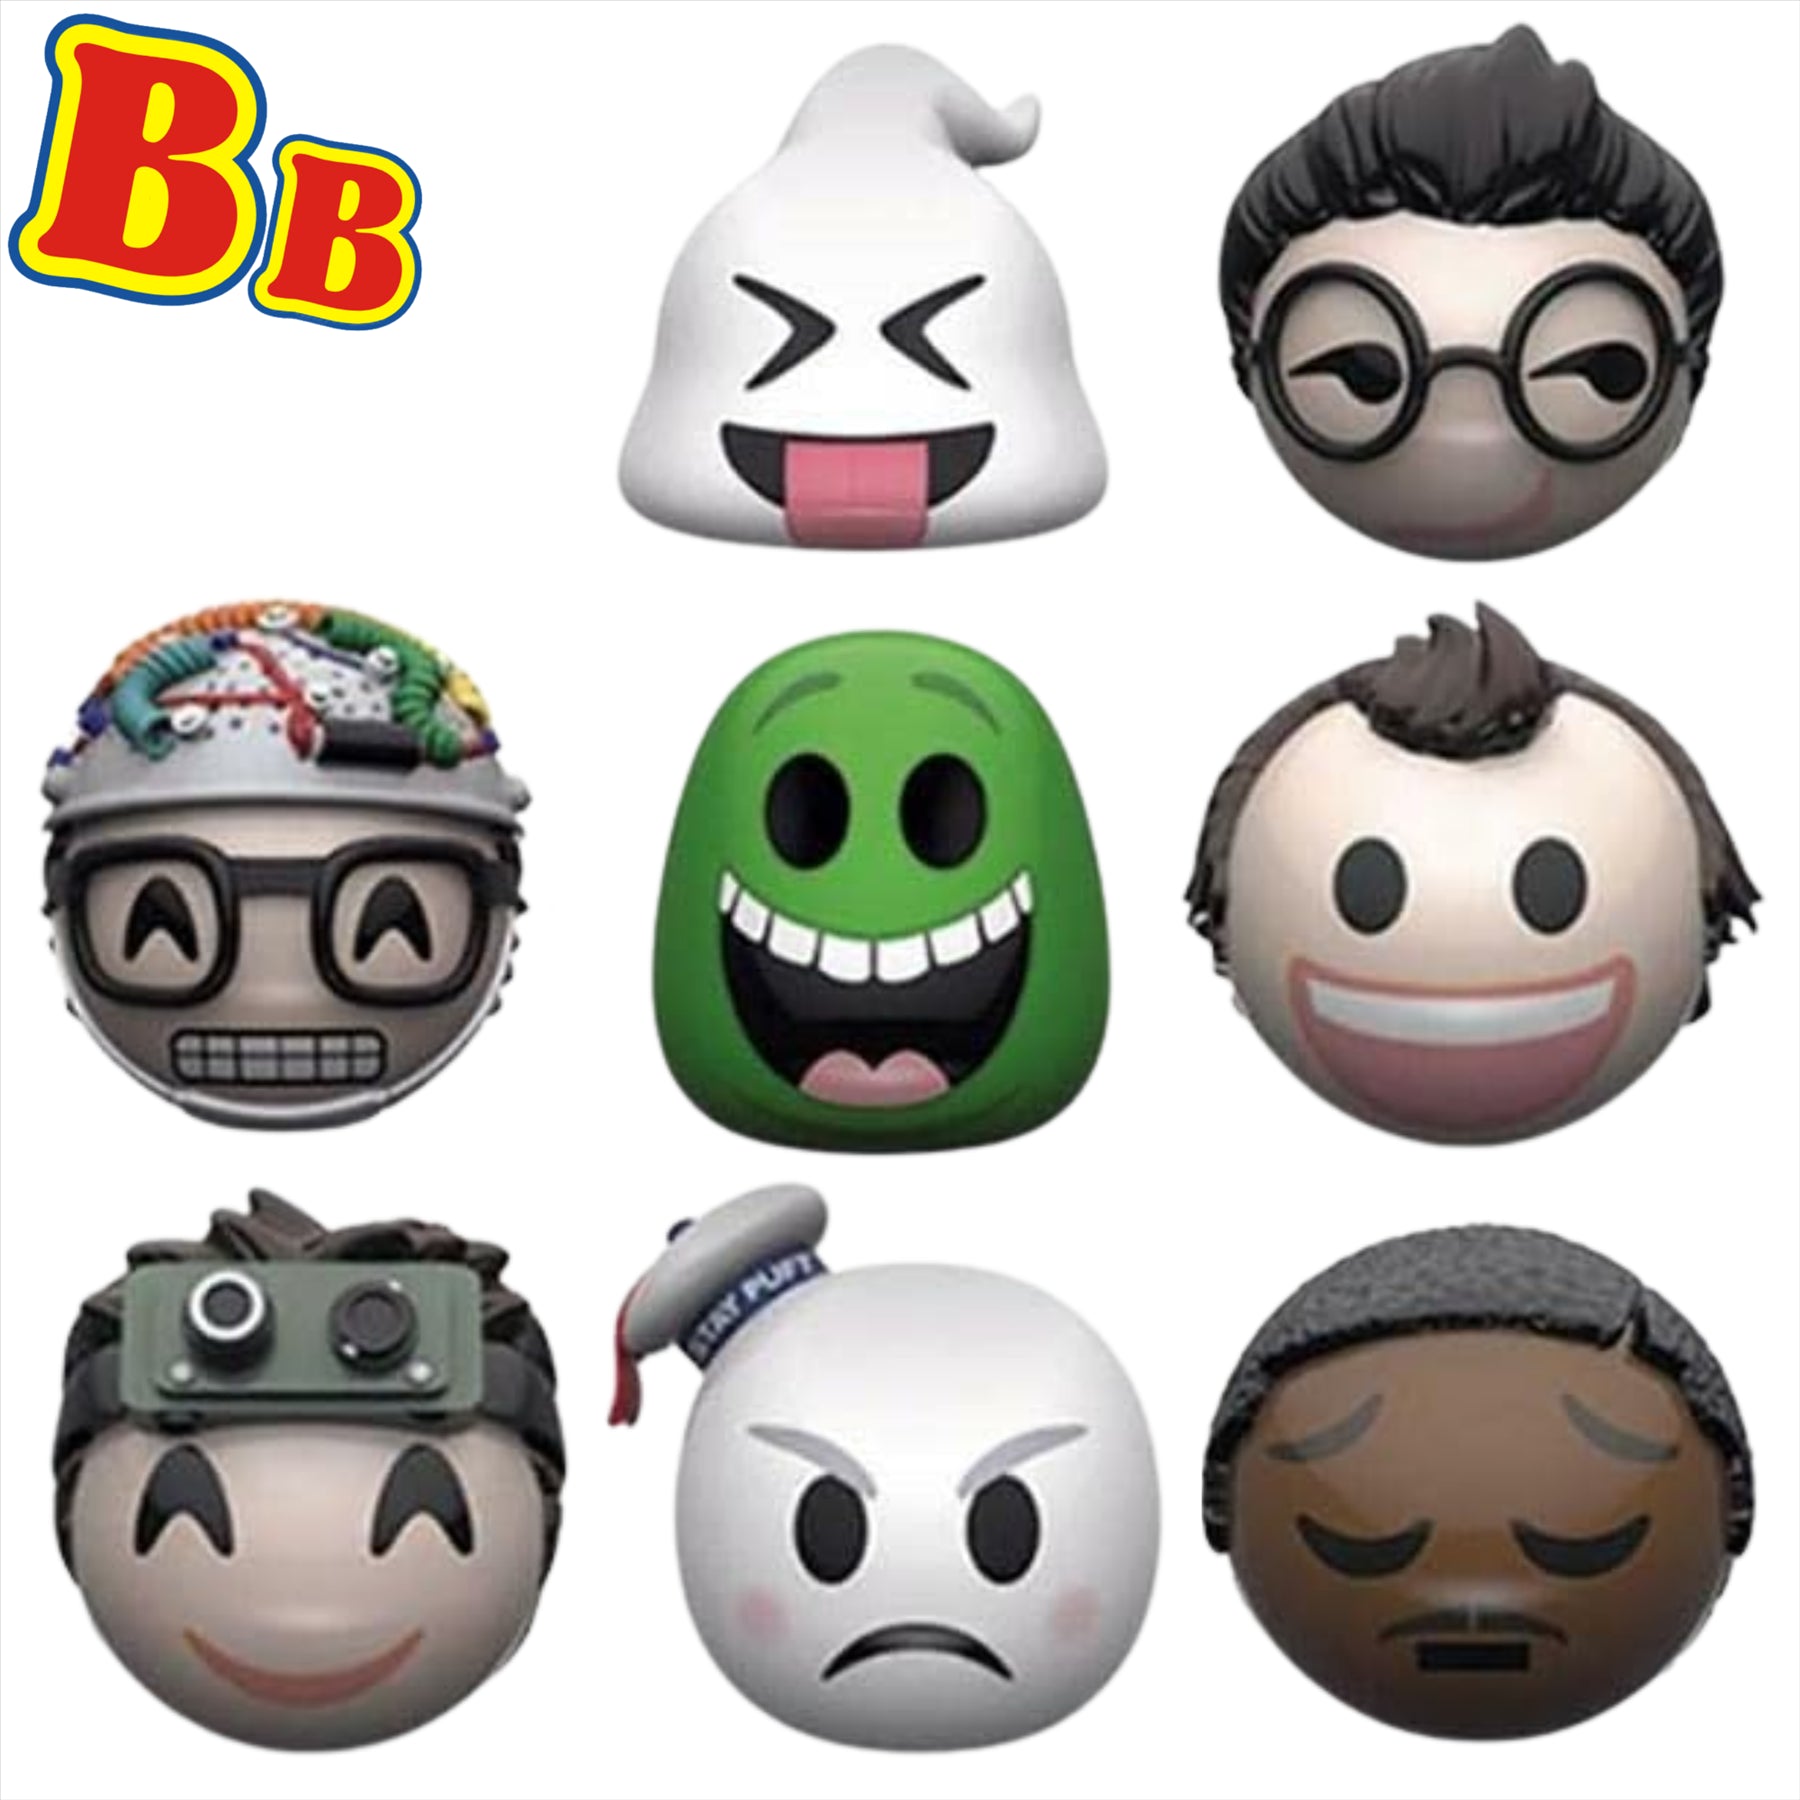 Ghostbusters - FunkoMyMoji Identified 4cm Collectible & Highly Detailed Figure Heads - Set 2 8-Pack - Toptoys2u